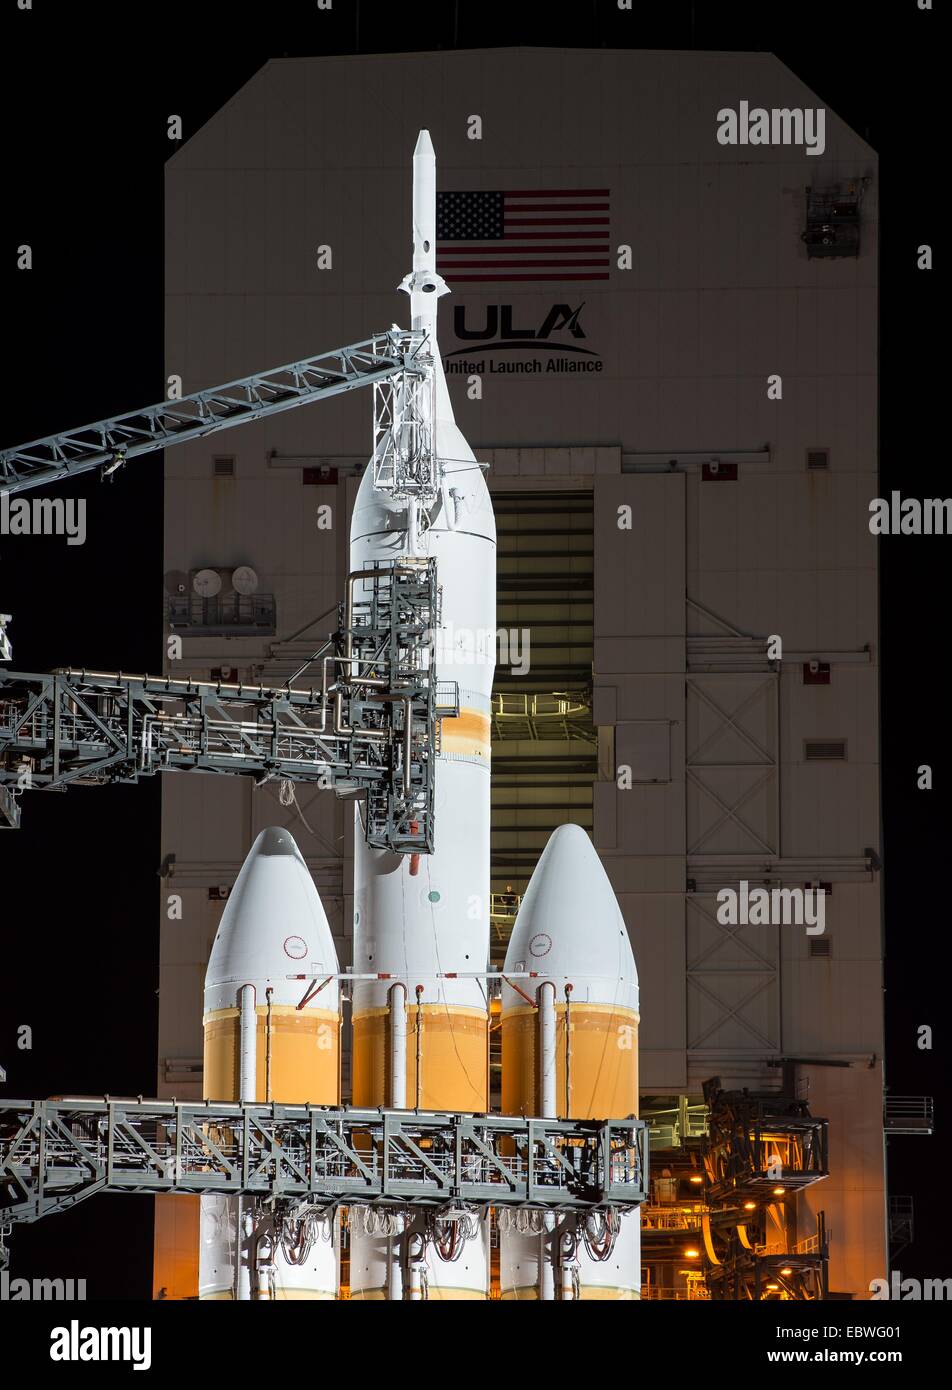 NASA's Orion spacecraft mounted atop a United Launch Alliance Delta IV Heavy rocket is visible after the Mobile Service Tower rollback in preparation for launch at Space Launch Complex 37 December 4, 2014 in Cape Canaveral, Florida. The launch was scrubbed after a multitude of issues postponed the lift off. Stock Photo